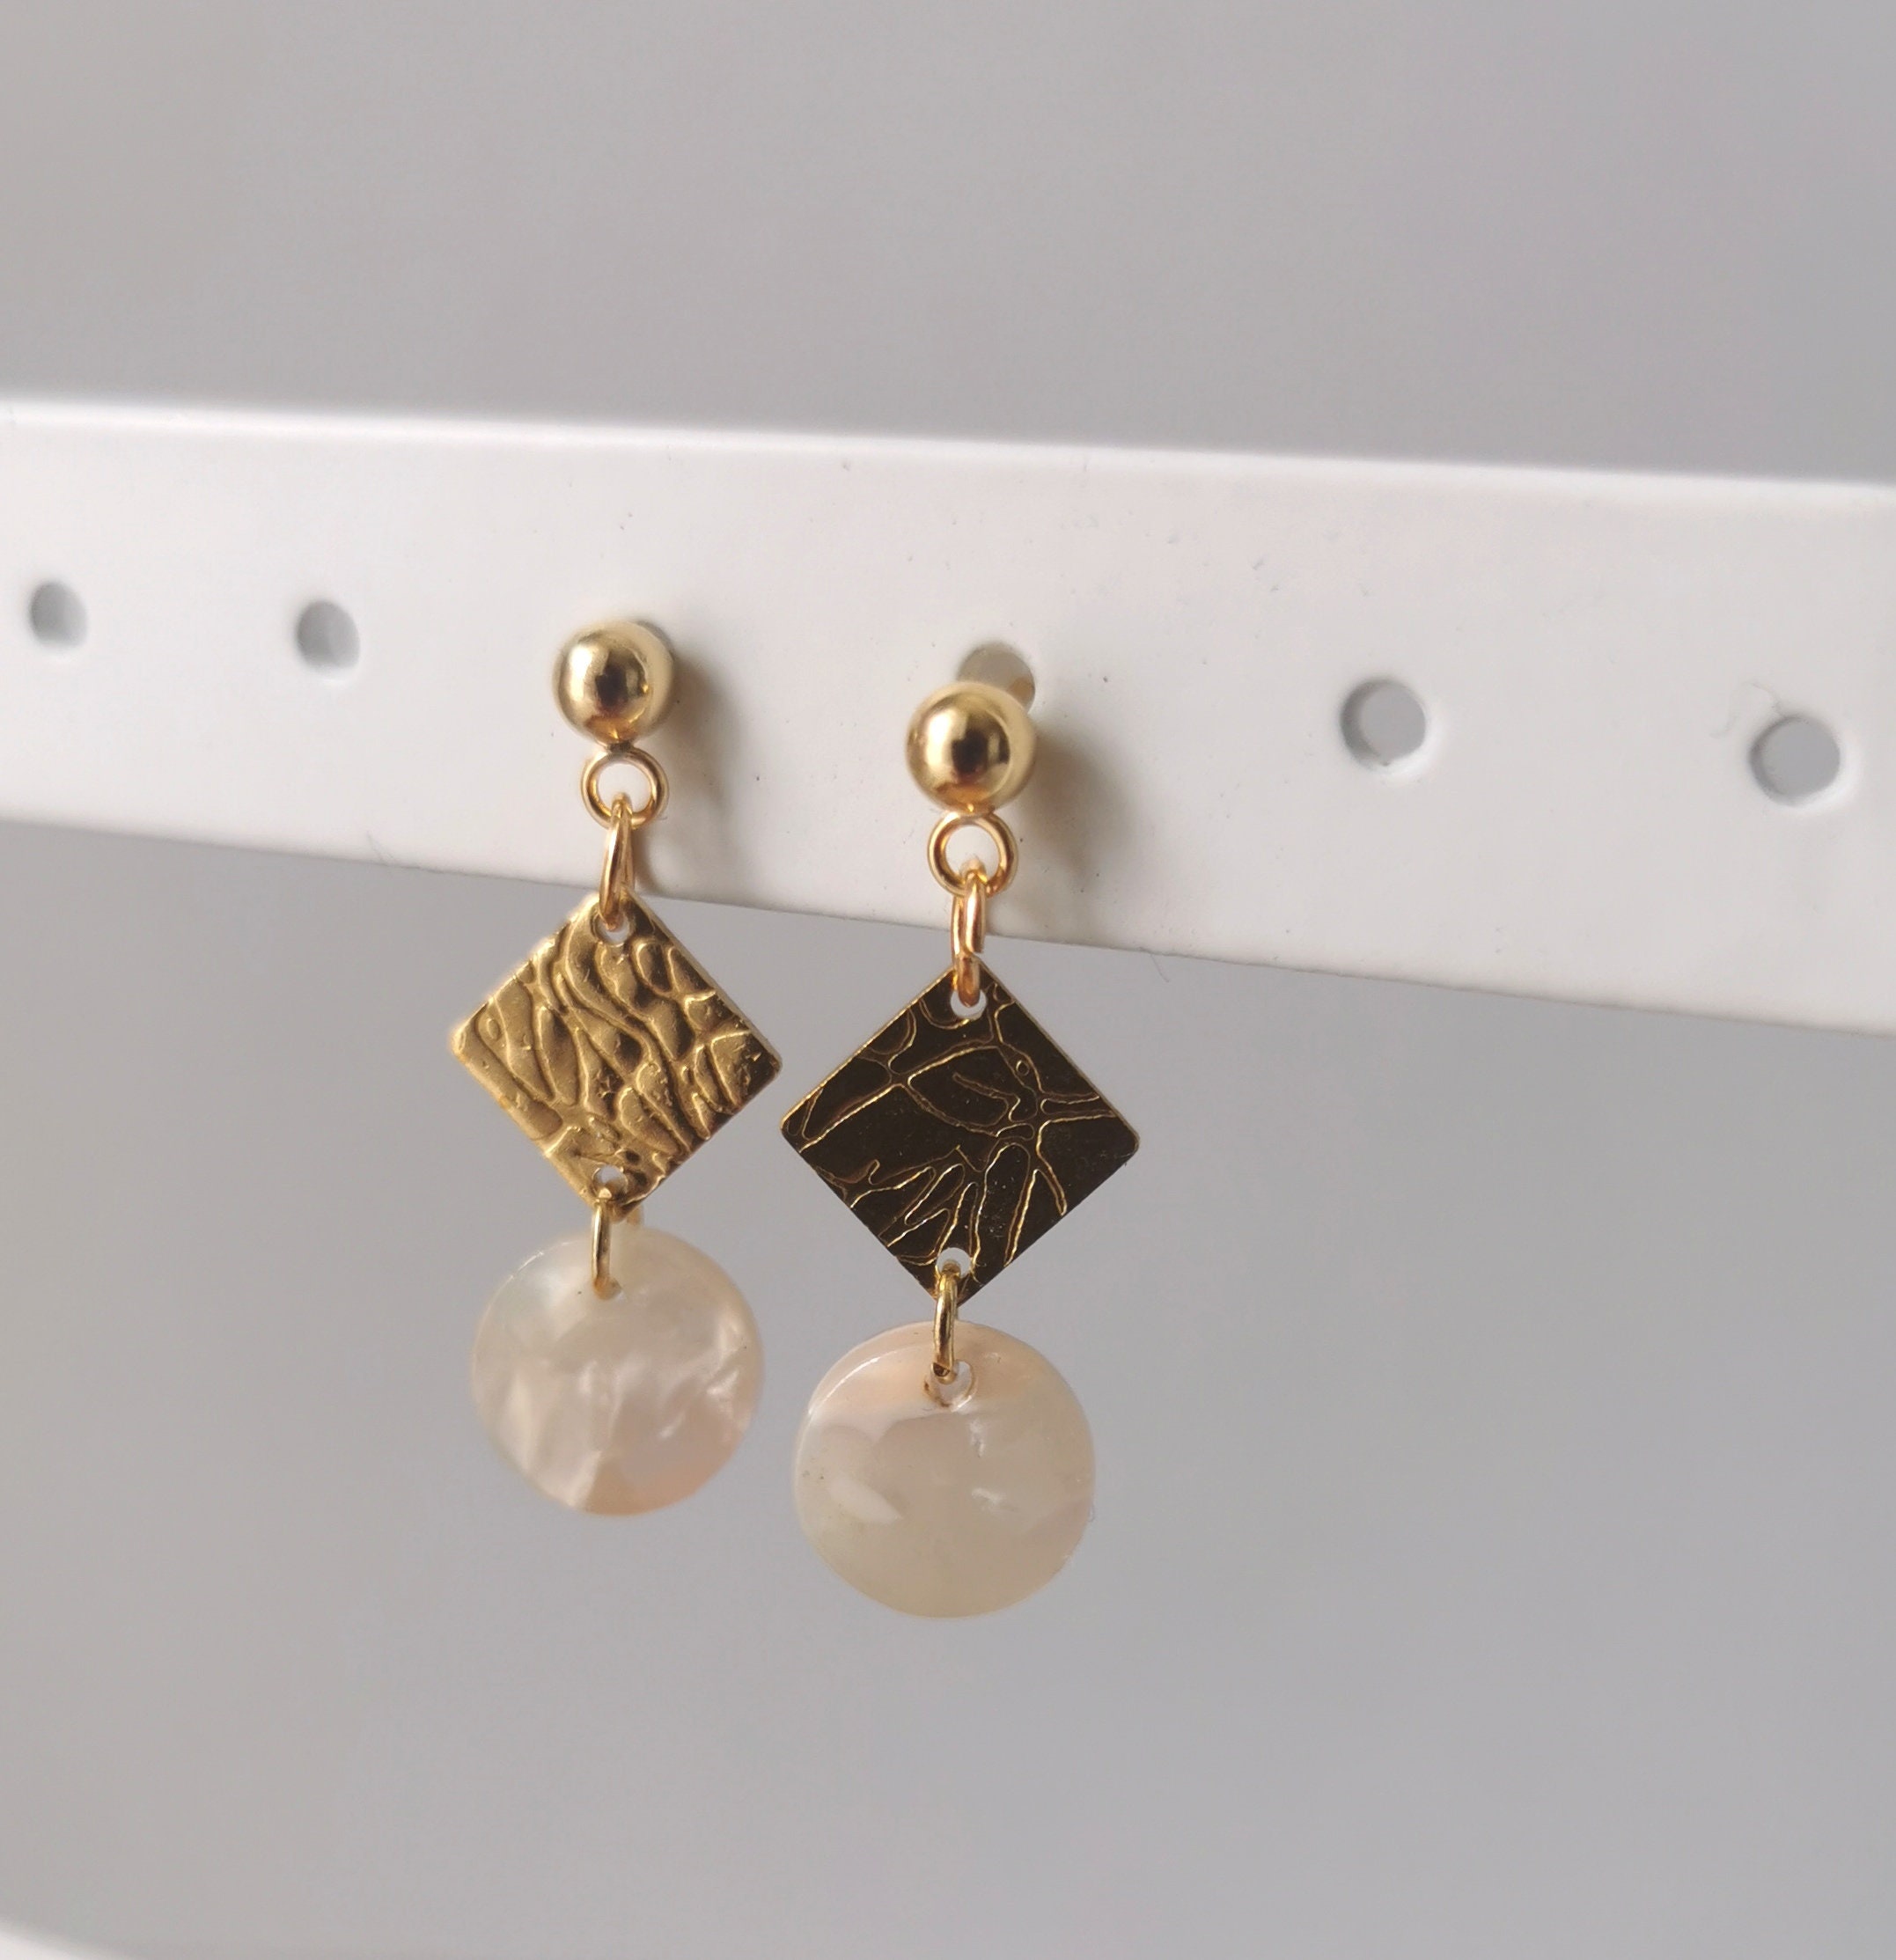 Dainty Pretty Earrings With Pale Pink Tortoiseshell & Textured Brass Rhombus Charm 18K Gold Plated Ball Stud Post